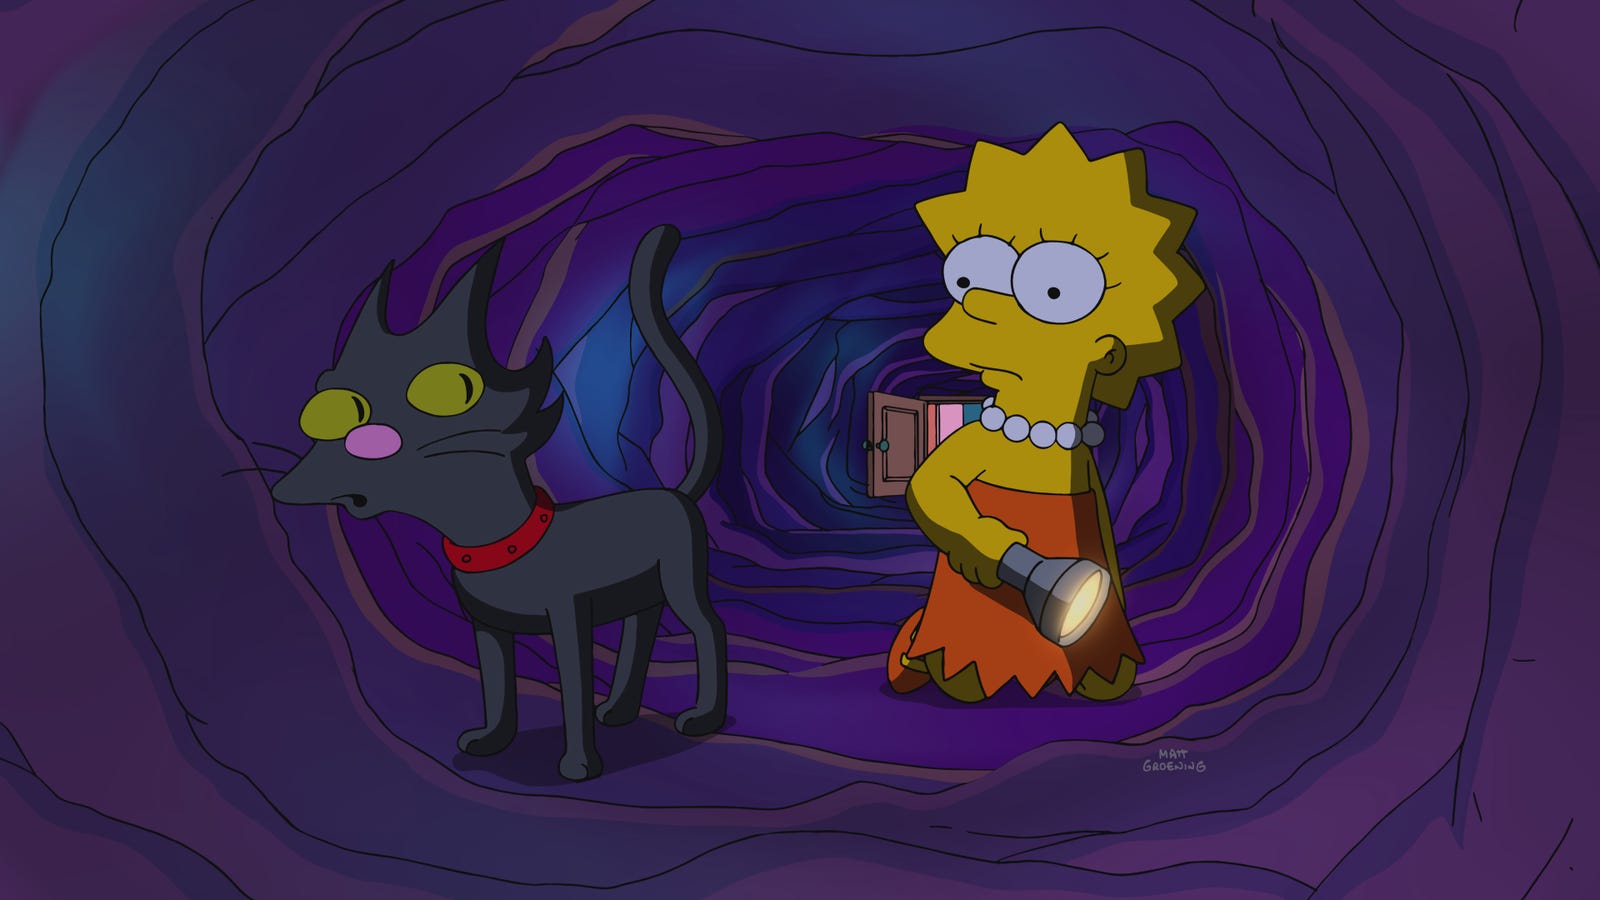 The Simpsons Walks Us Through A Visually Ambitious But Forgettable 